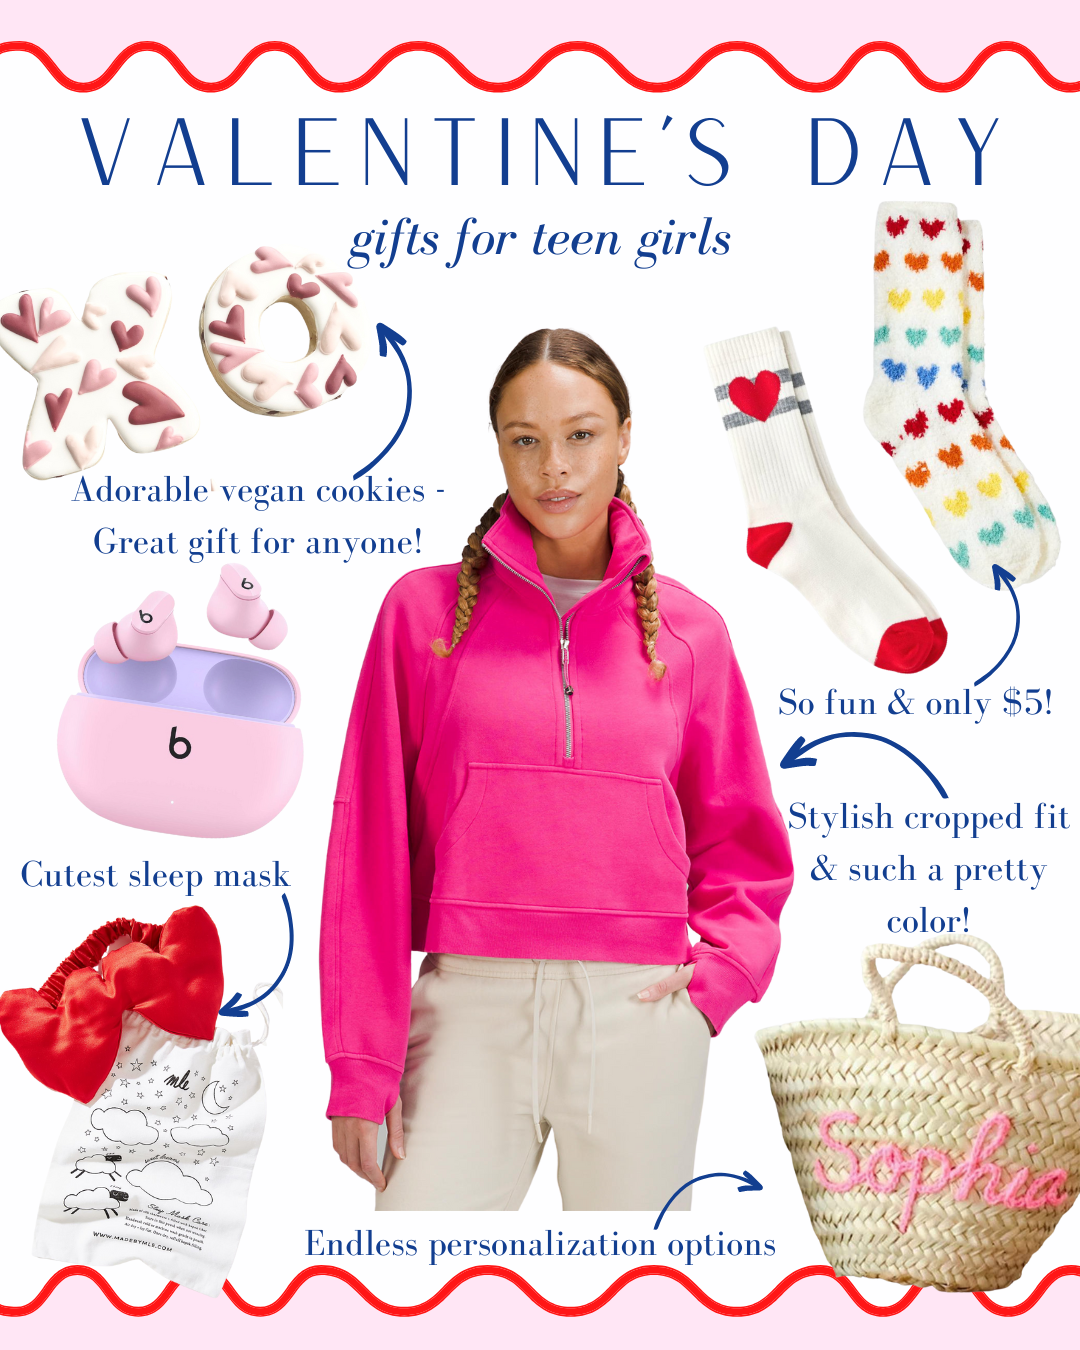 Valentine's Day gifts for teen daughters, Valentine's Day gifts for teenage daughters, Valentine's gifts for teen girls, Valentine's Day gifts for teens, Valentine's Day gifts for family members, Valentine's gift ideas for teen girls